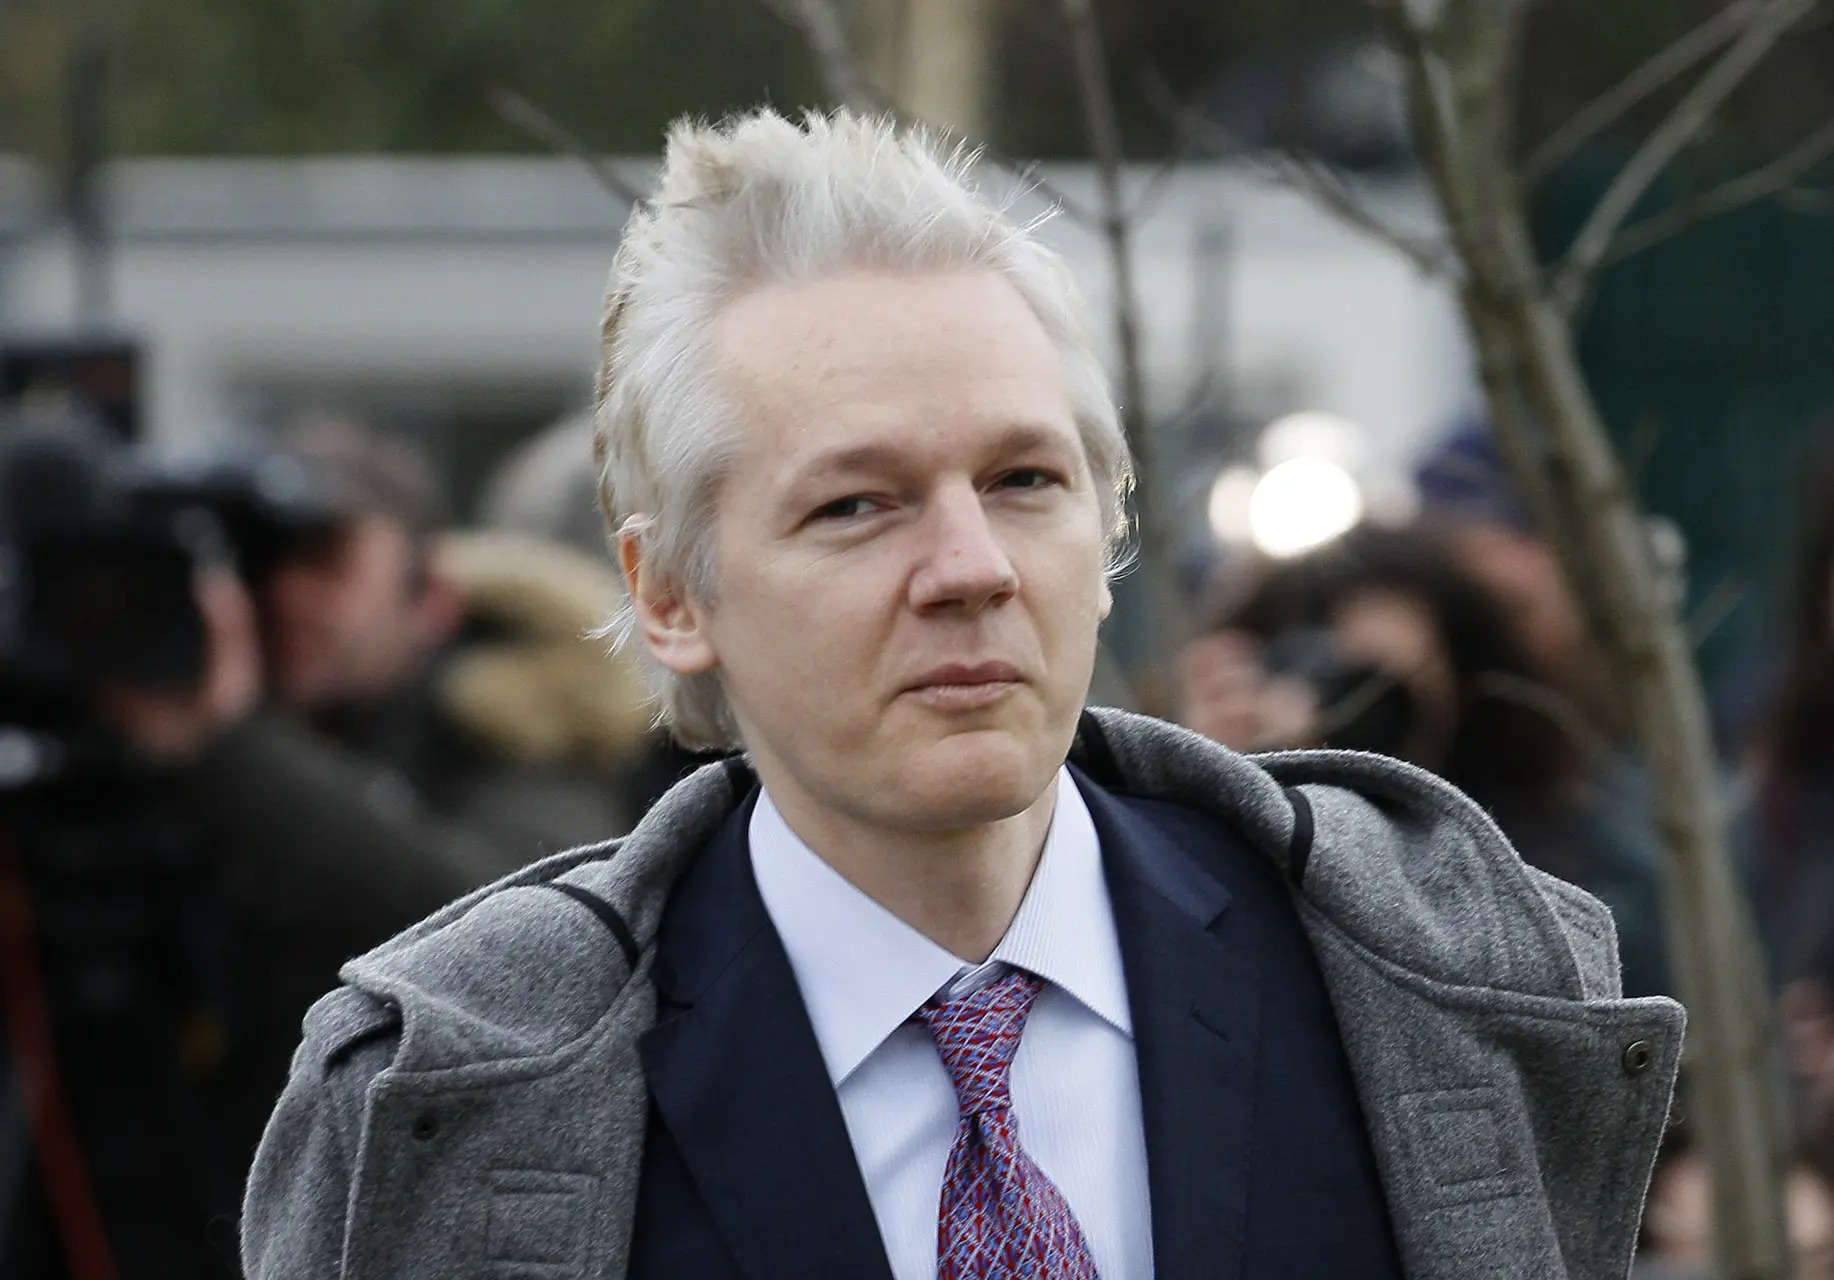 WikiLeaks founder Julian Assange pleads guilty in deal with US that secures his freedom, ends legal fight 